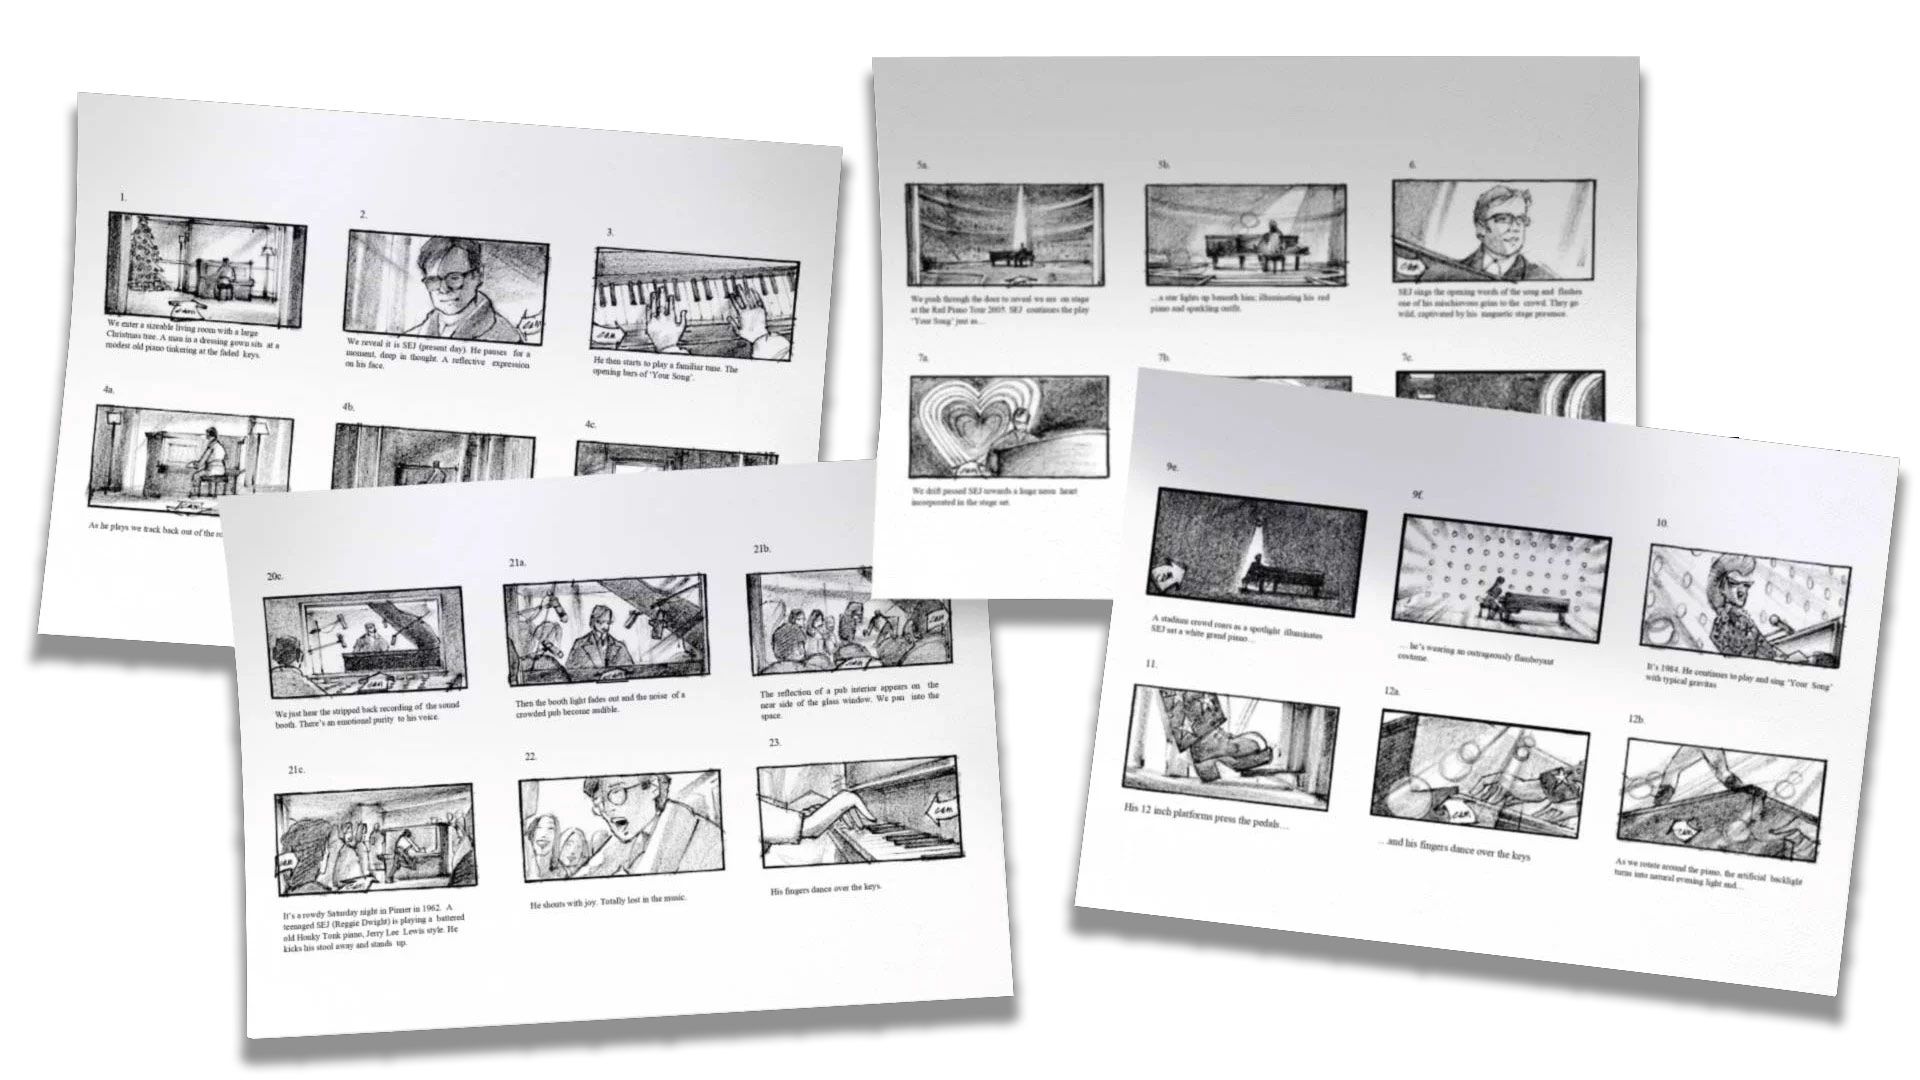 Sheets of paper showing sketched storyboard ideas for the advert